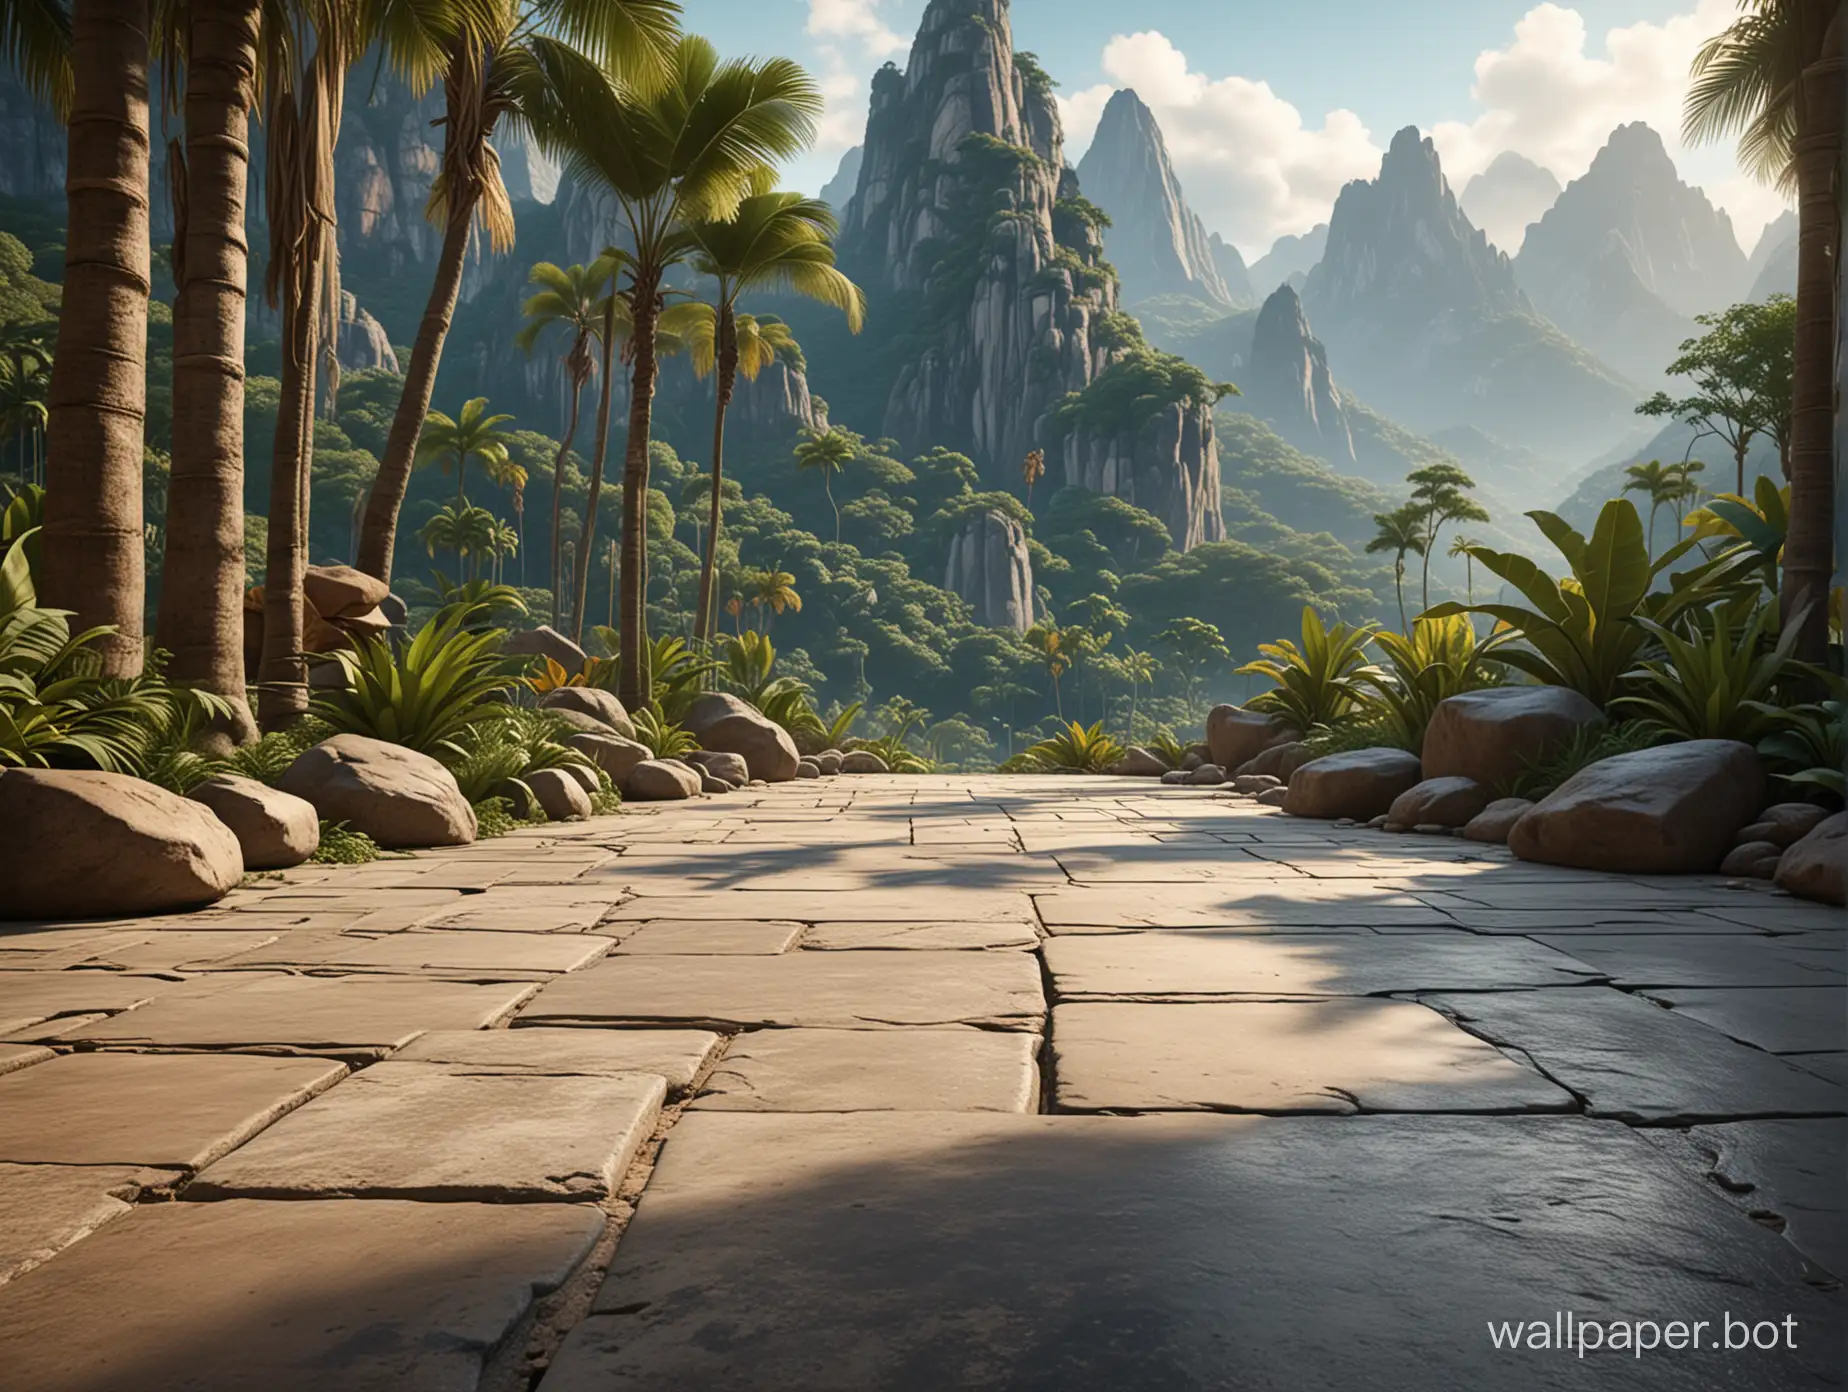 Scenery from the tropical world, stone floor, looking mountains in the background, realistic and highly detailed, Disney style, cinematic mood, trees on the sides.